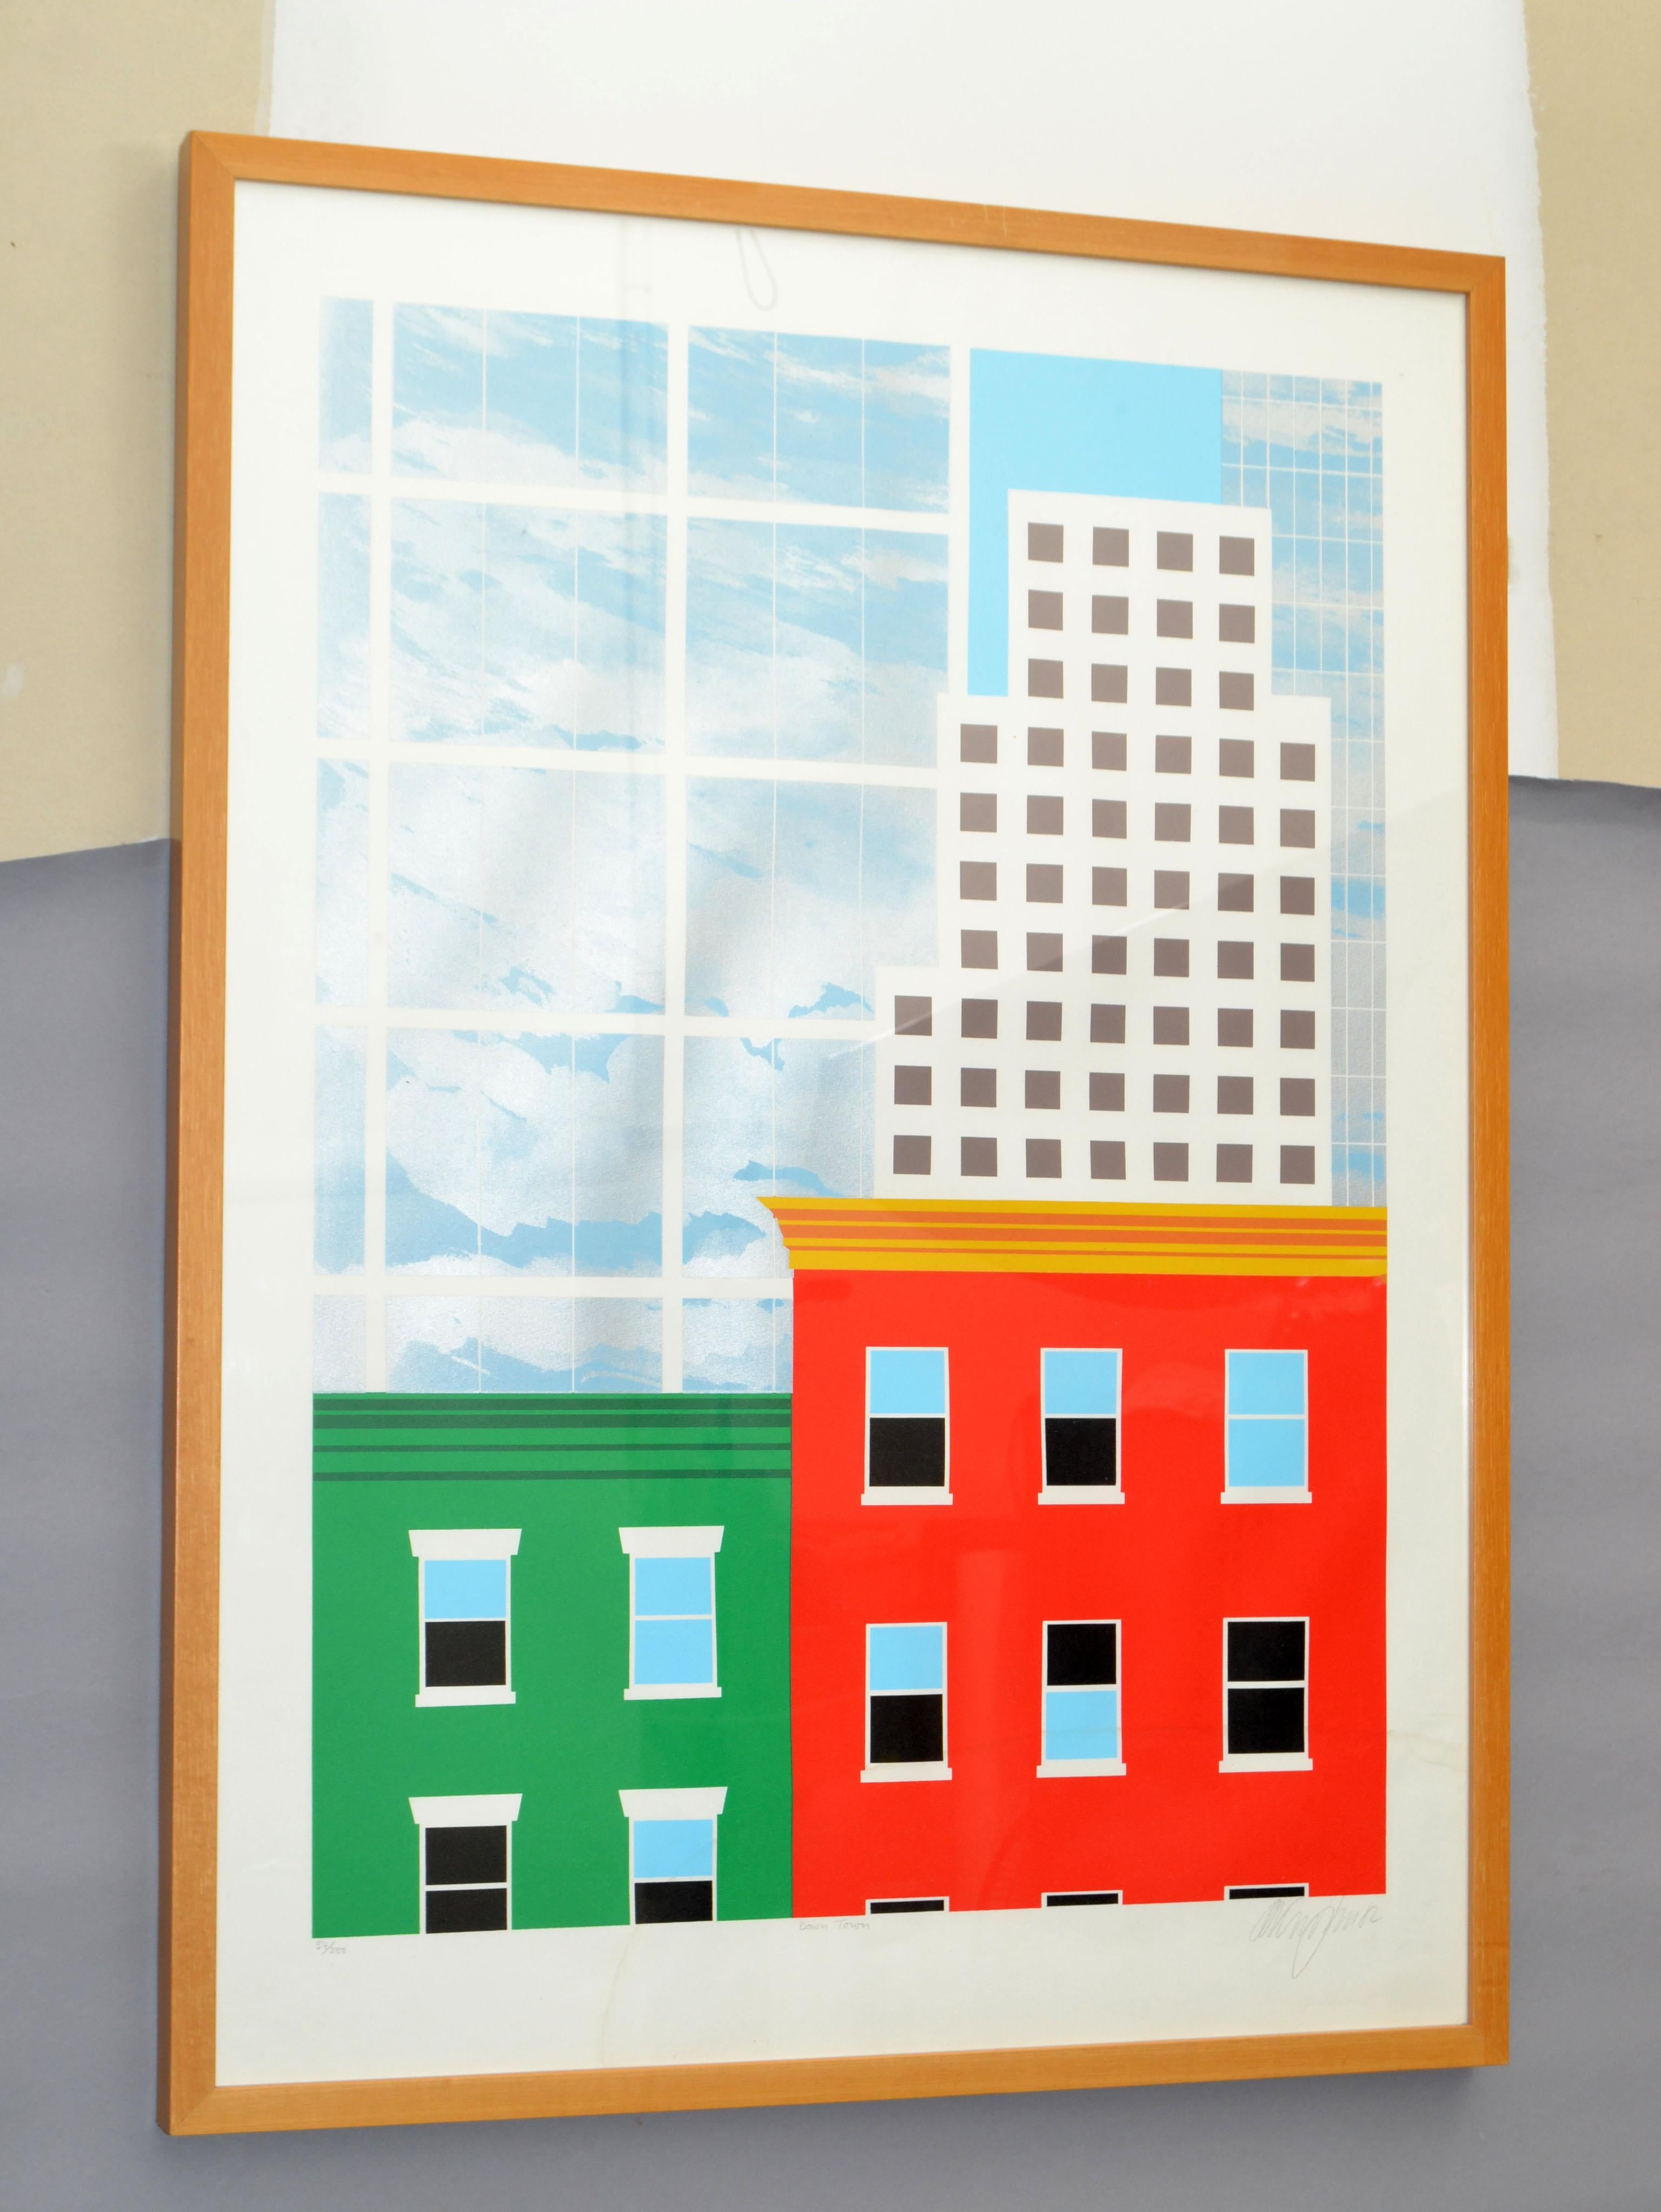 Large Wood Framed Down Town New York made in 1982 Mid-Century Modern Wall Painting, Fine Art.
Signed by Artist., Numbered 54/250.
Fine Art Size: 19.75 x 27.5 inches.
 
 